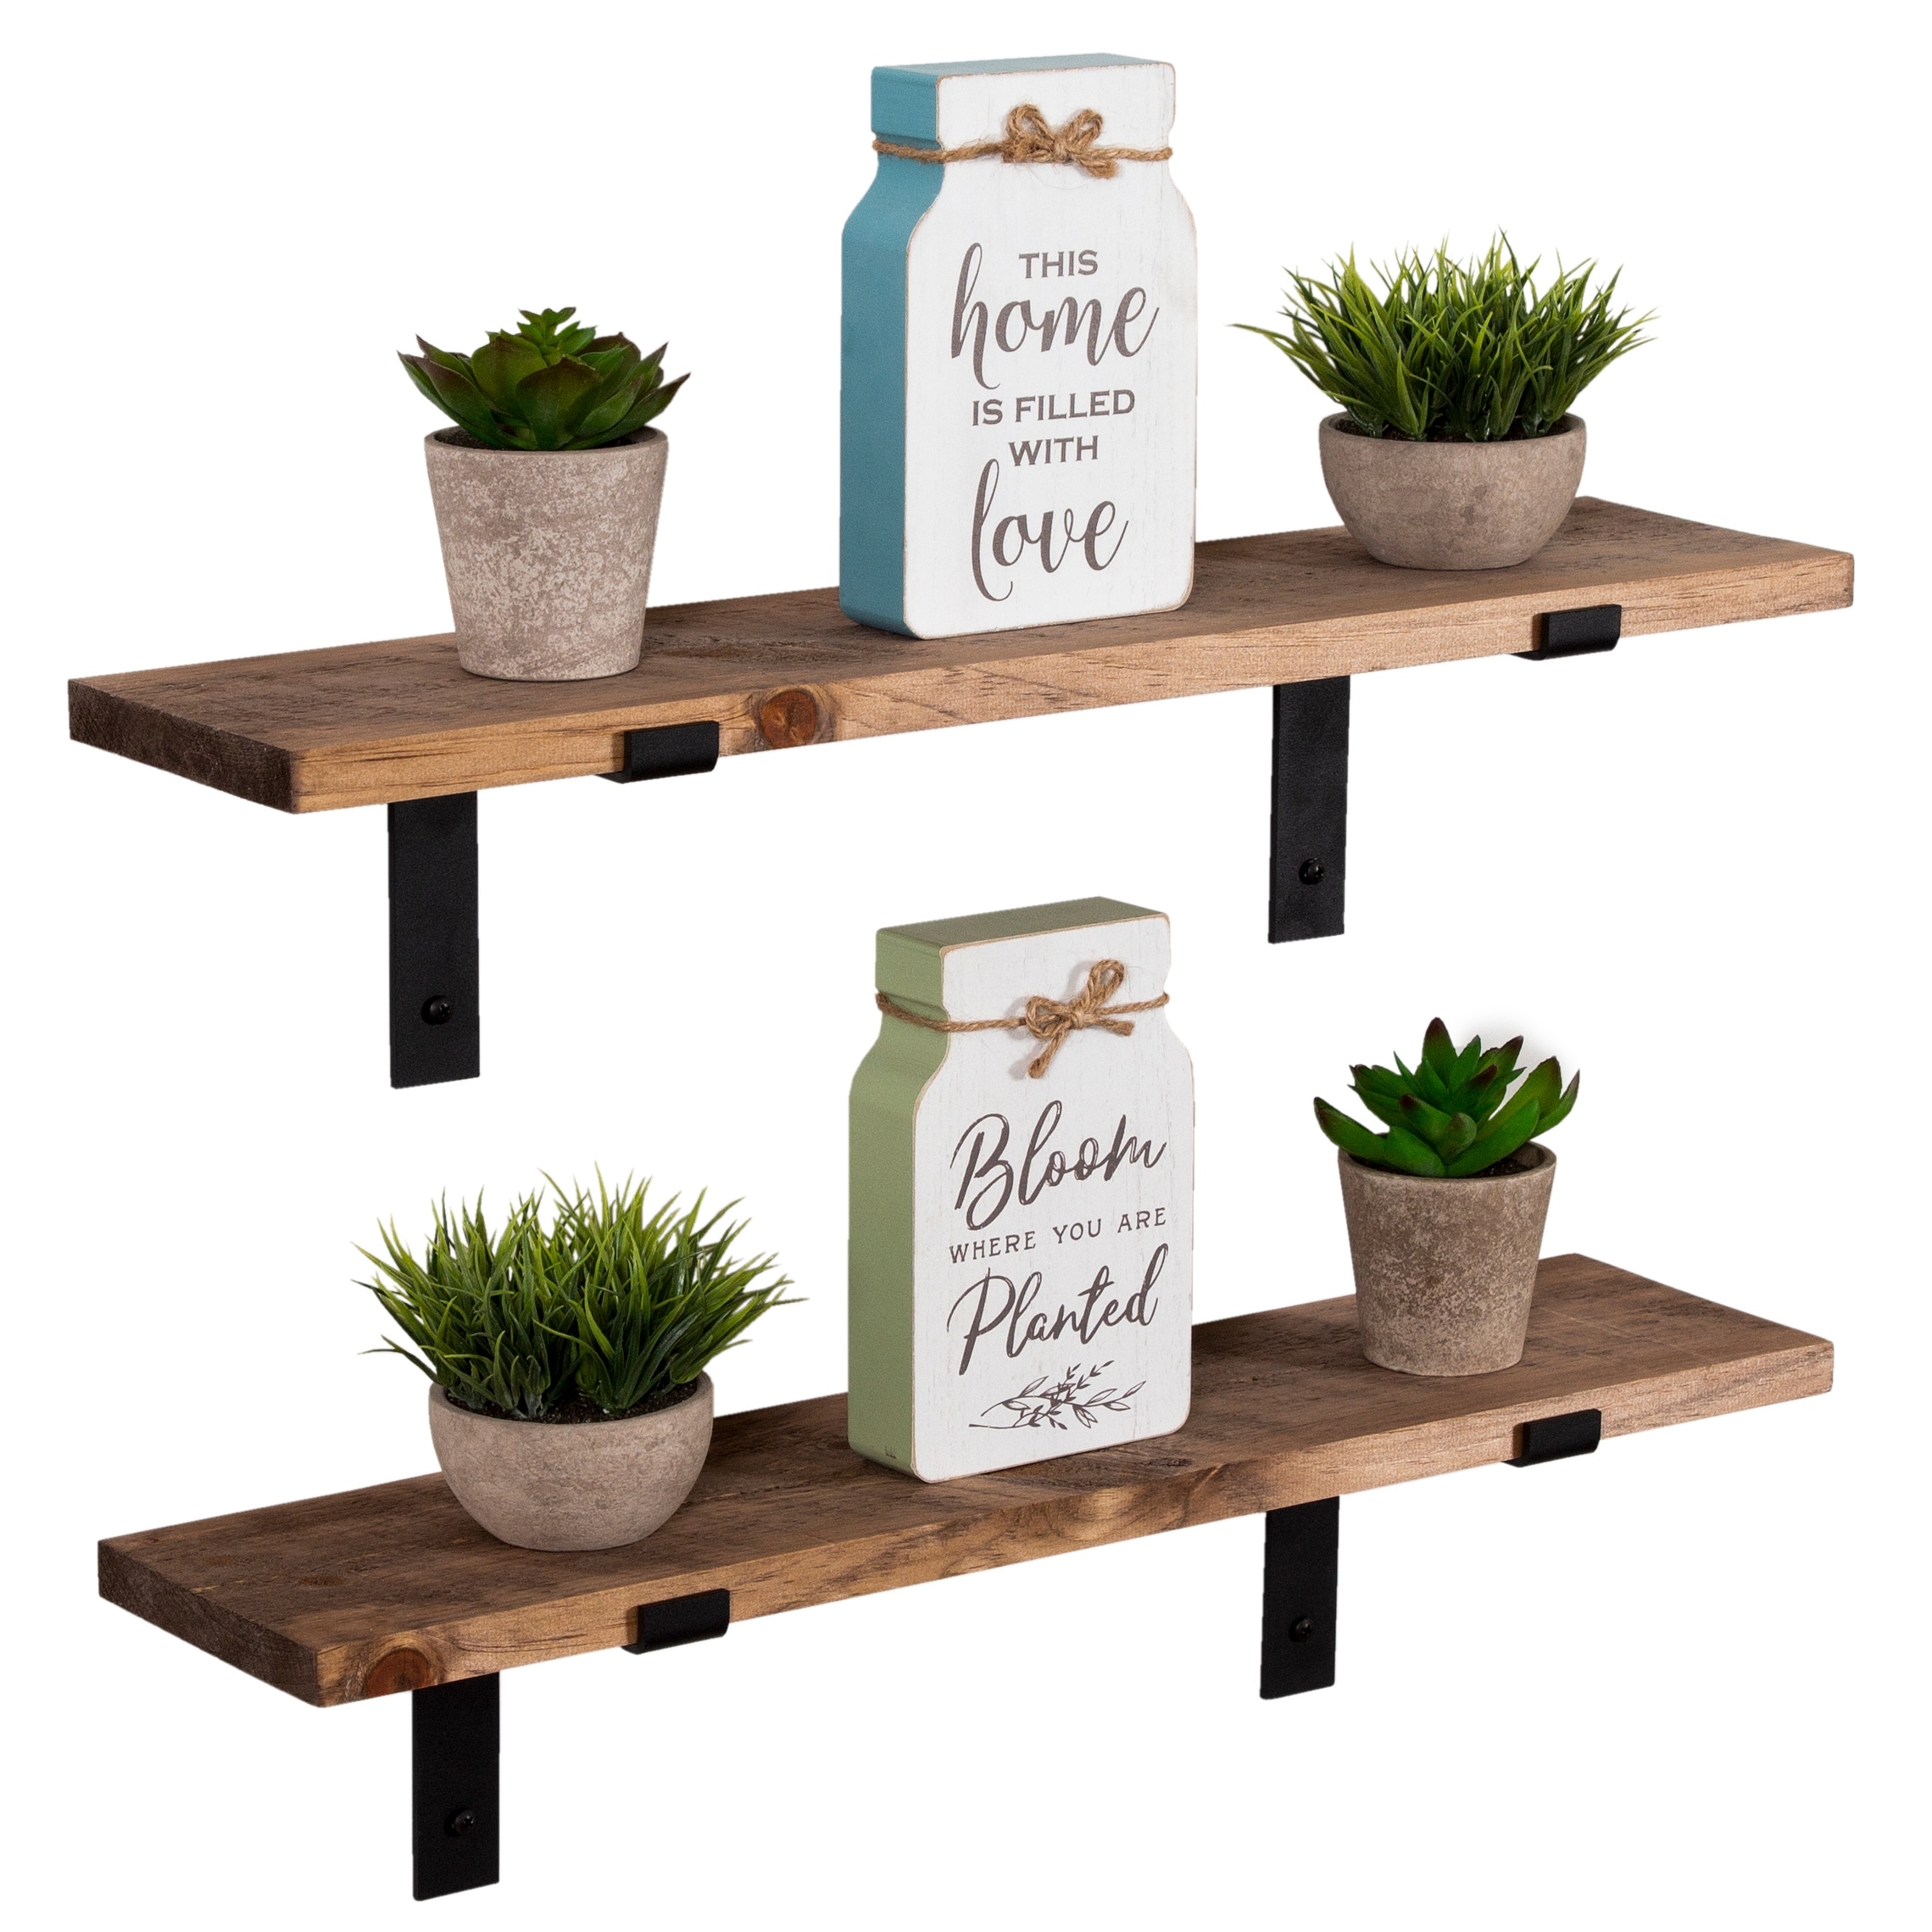 https://ak1.ostkcdn.com/images/products/is/images/direct/ad9ff02b4280ce8d76f687035a1447a4210590e6/Rustic-Wood-Floating-Shelves-with-L-Brackets-USA-Handmade-Set-of-2.jpg